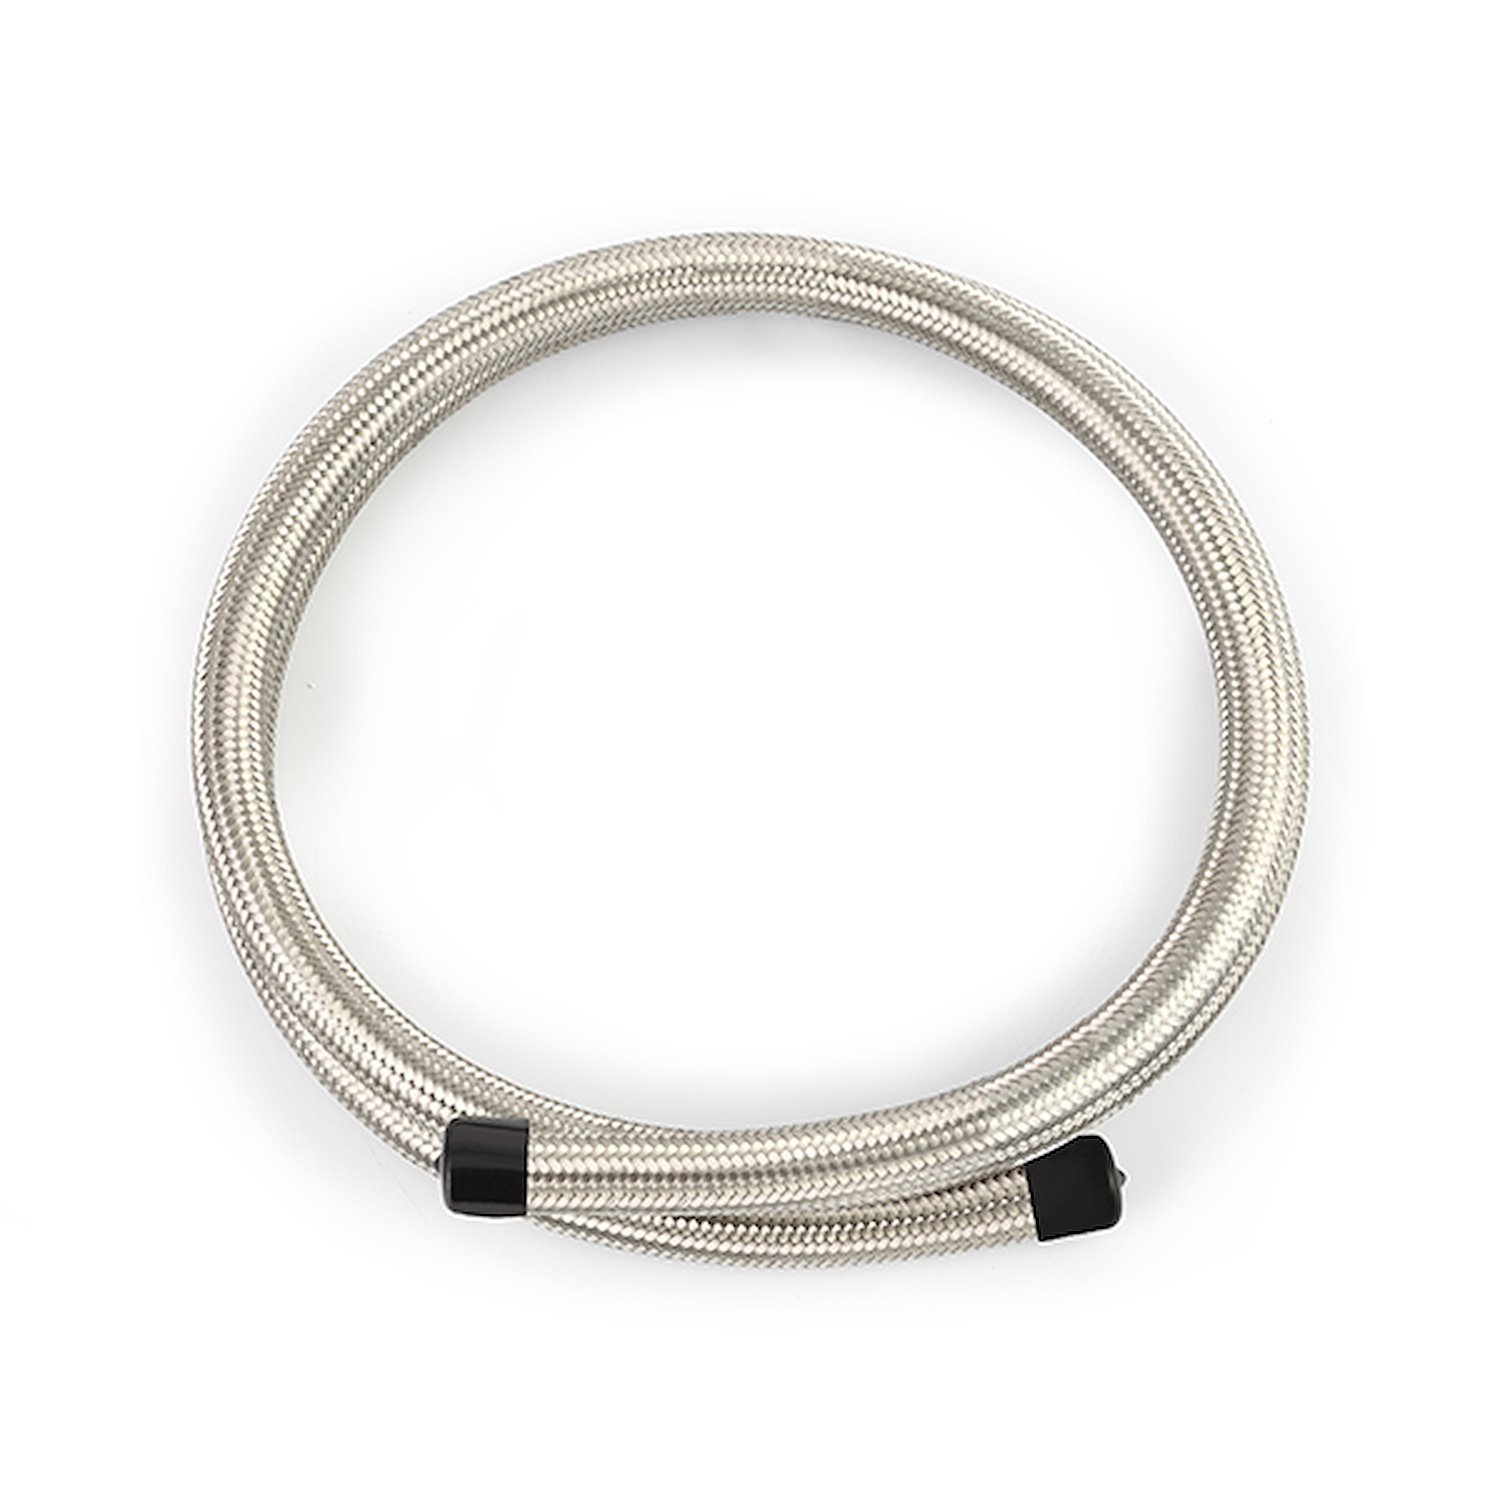 8AN 6FT. HOSE STAINLESS